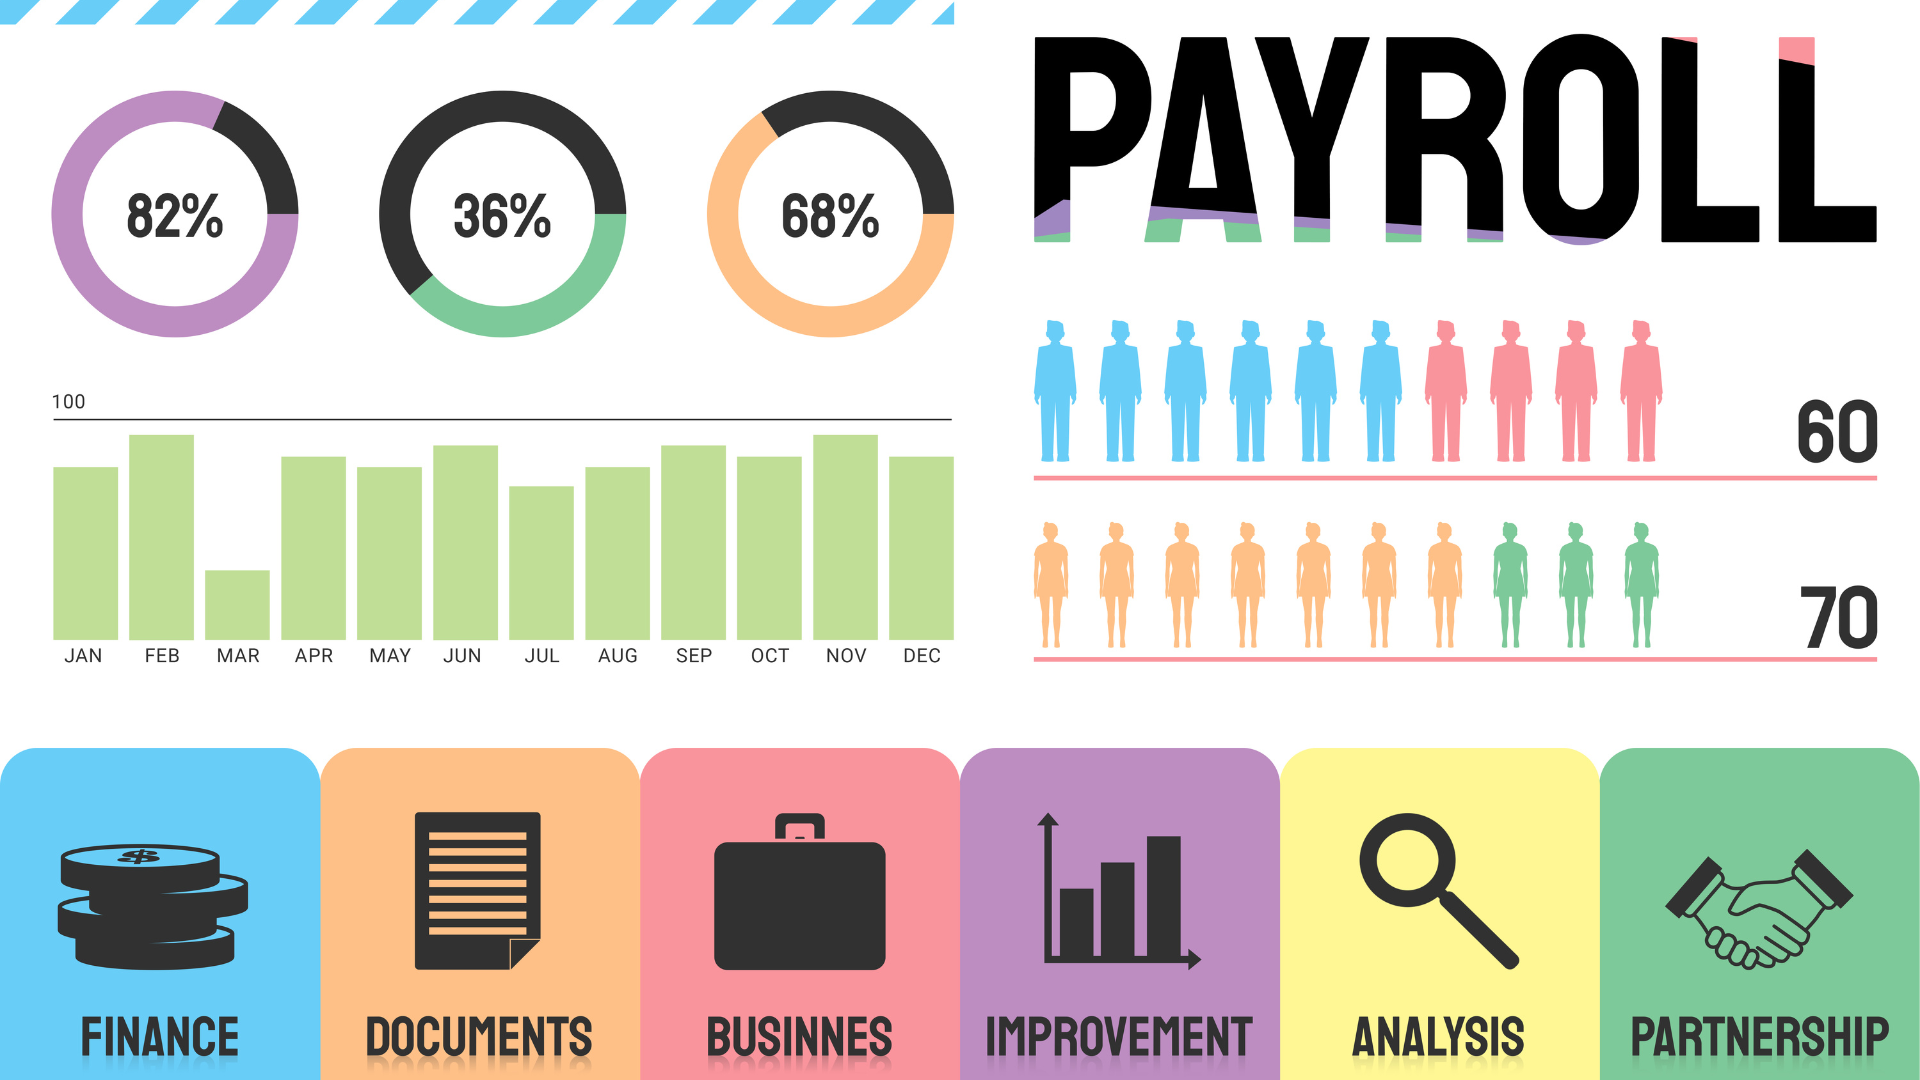 The image is colorful and on right side top corner we Payroll is written to show online payroll services in singapore. In left side of image we have analytics graphic and below too.